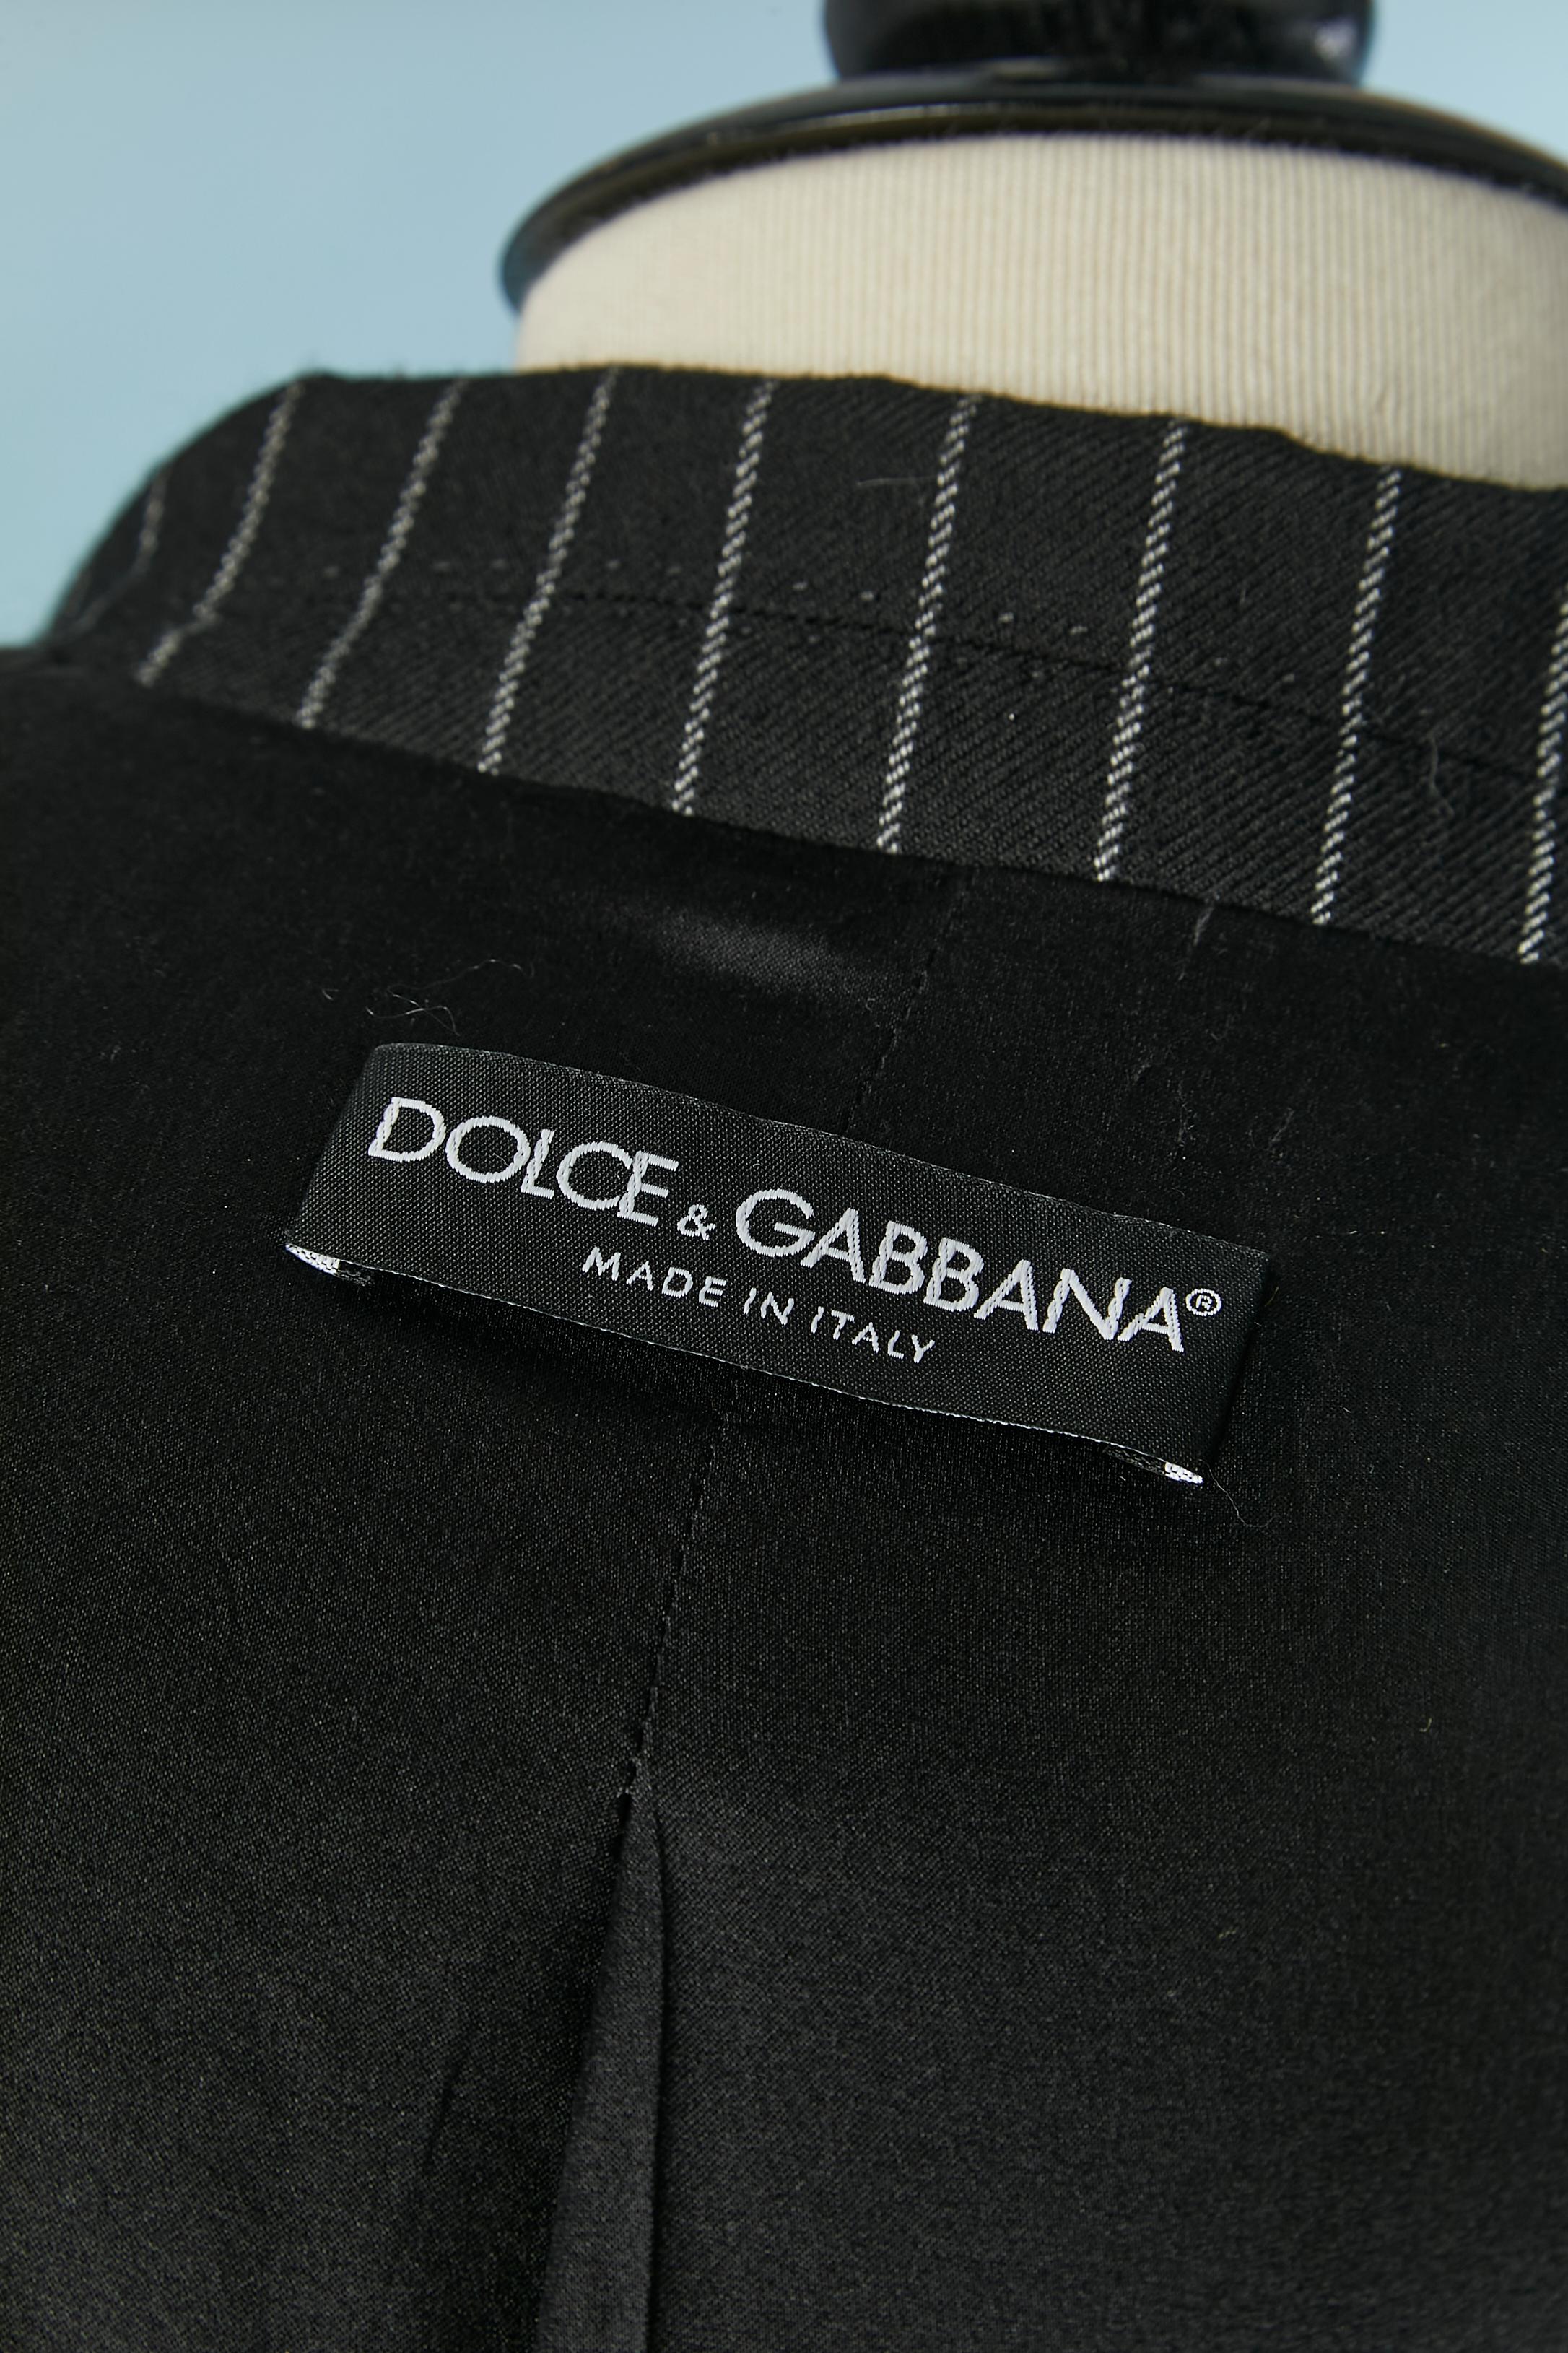 Black and white pin-striped trousers-suit Dolce & Gabbana  2